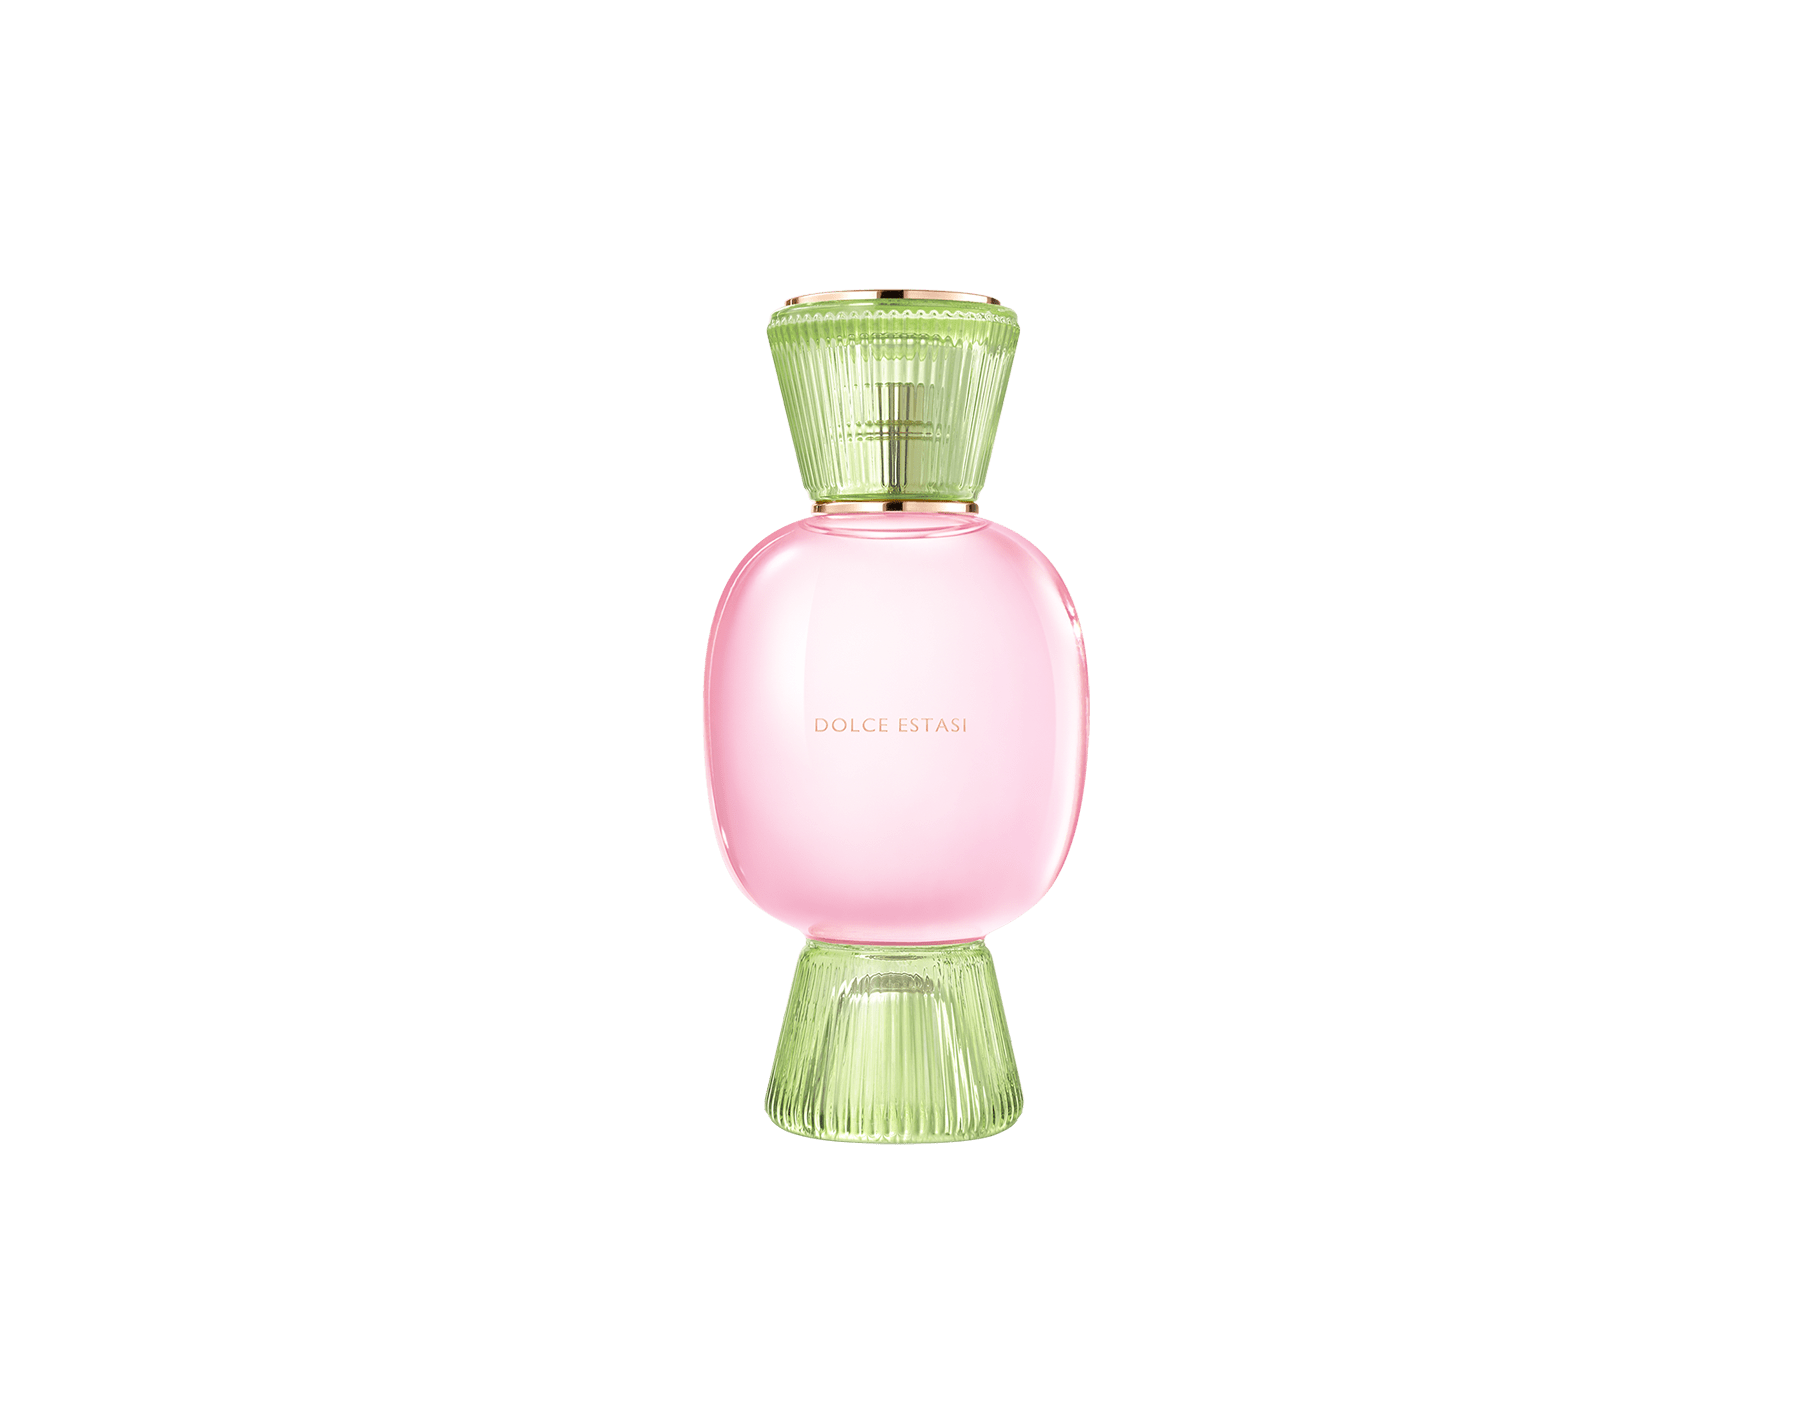 “It is the celebration of sweetness, of the Italian family cocoon.” Jacques Cavallier A soothing powdery floral that transports you to an Italian pasticcerria, recalling youthful memories of enjoying delectable Italian pastries. 41240 image 1